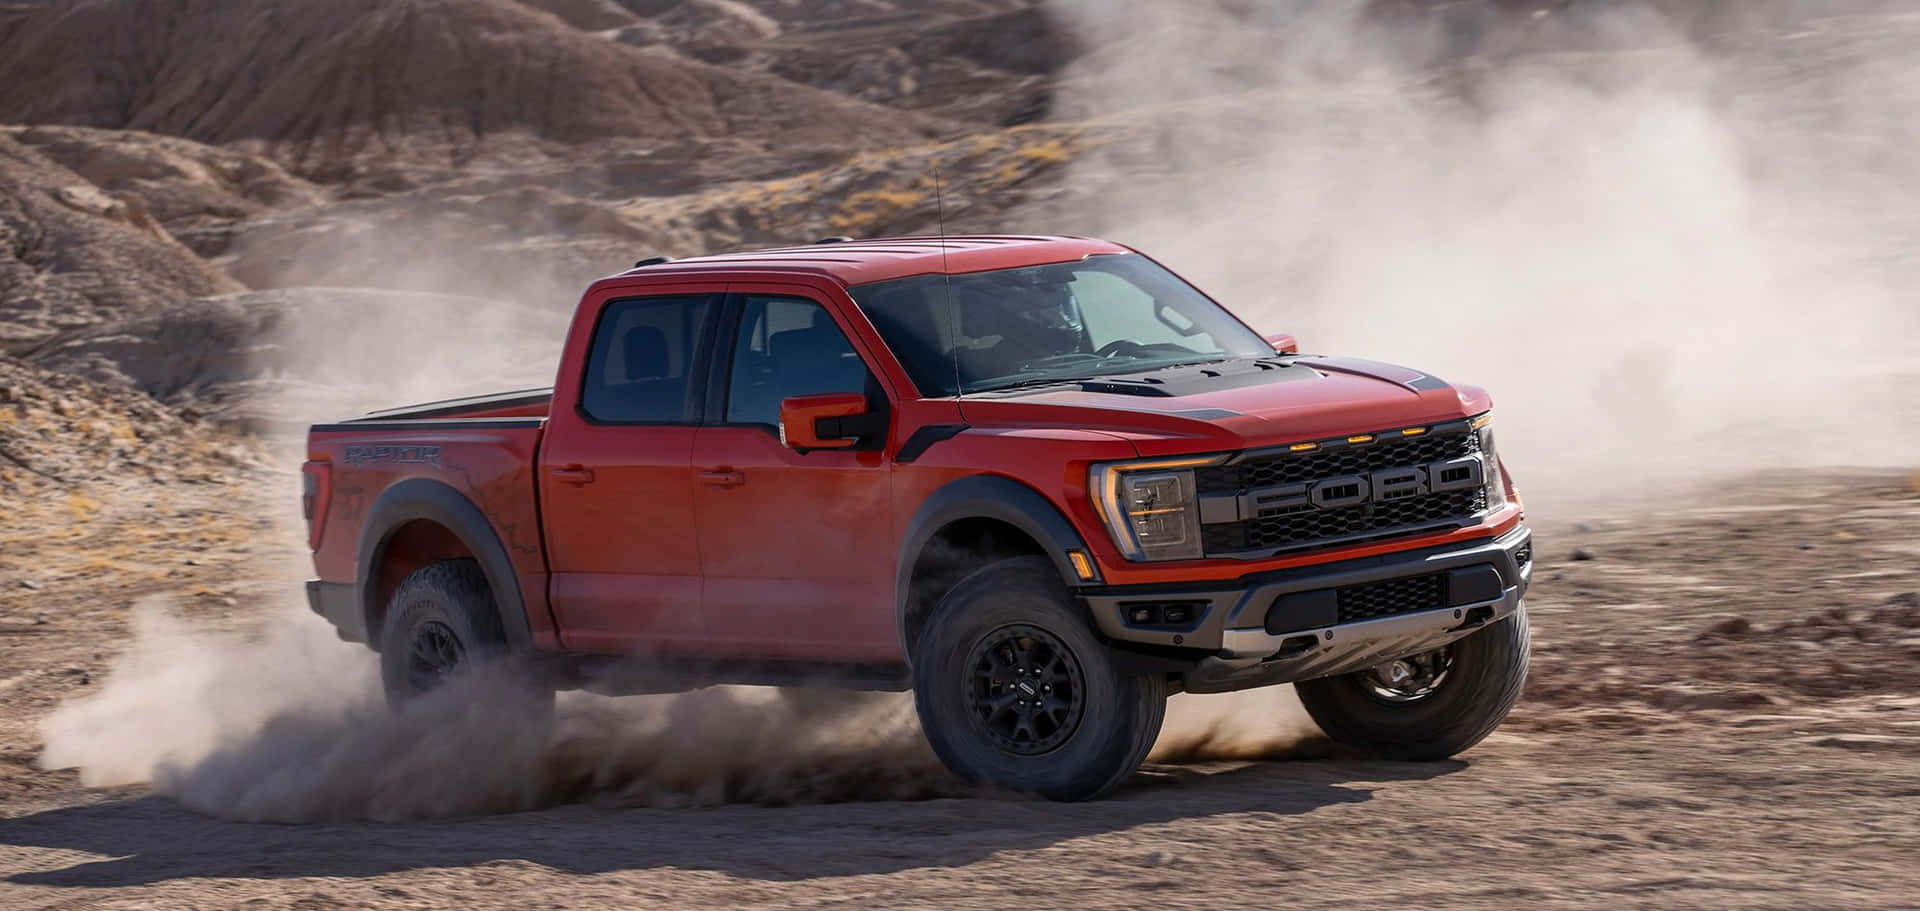 The Red 2019 Ford F-150 Rambo Is Driving Through The Desert